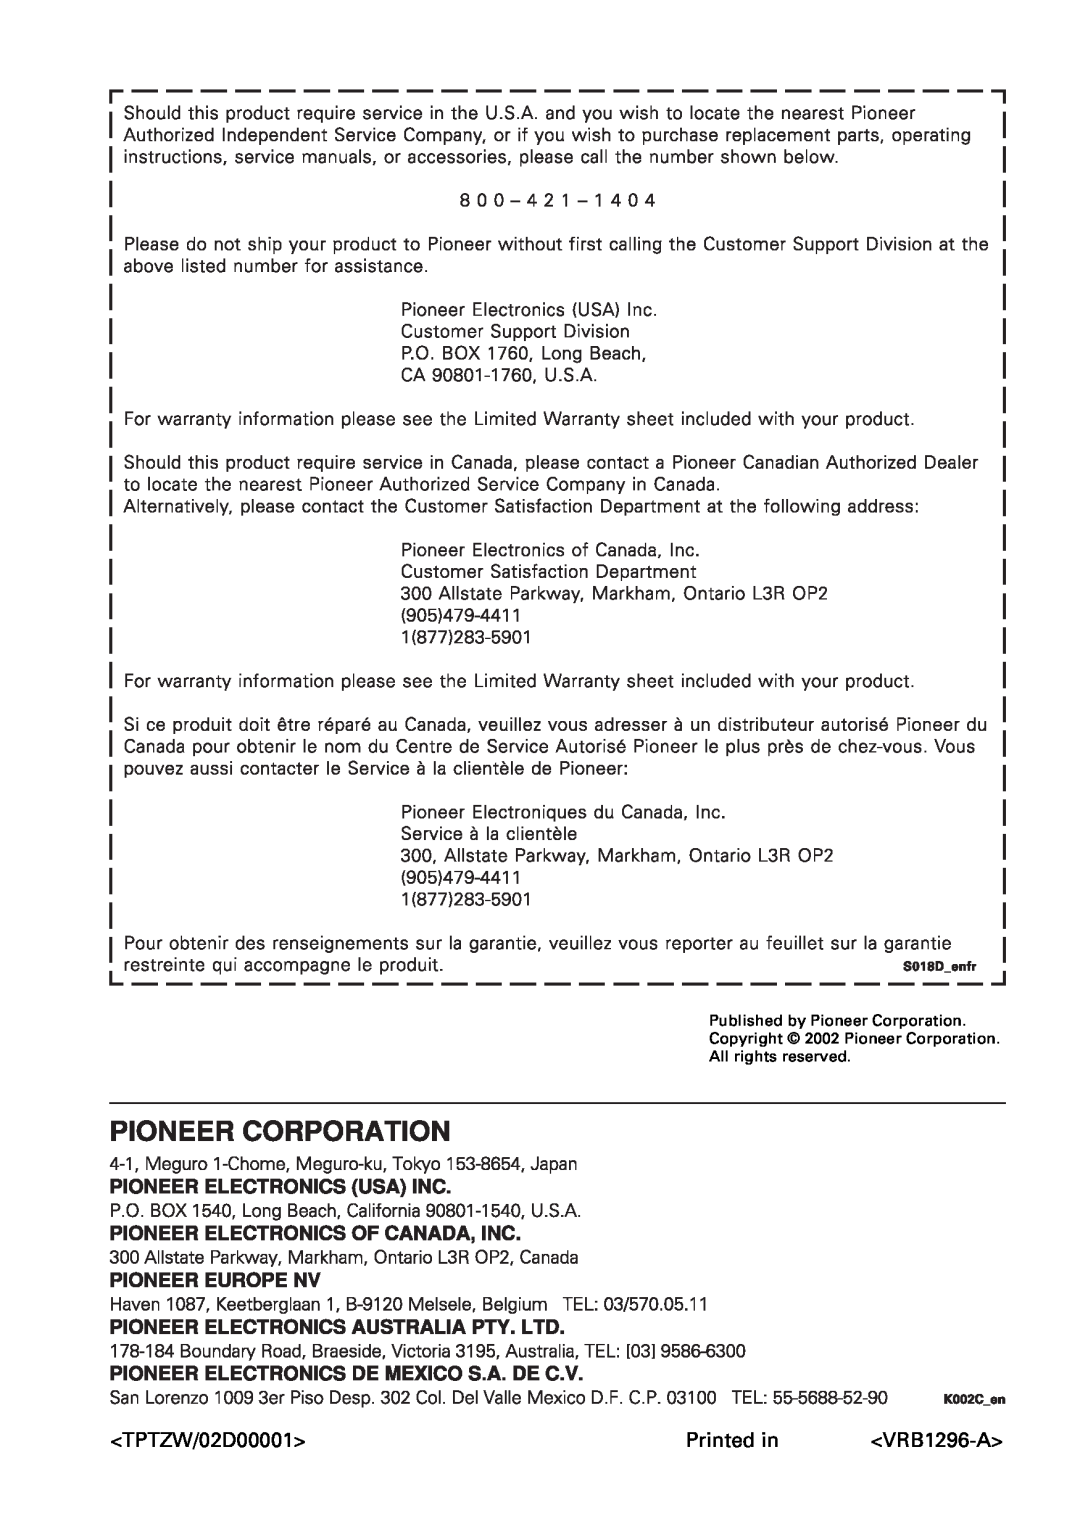 Pioneer DV-656A, 655A operating instructions TPTZW/02D00001, Printed in, VRB1296-A 